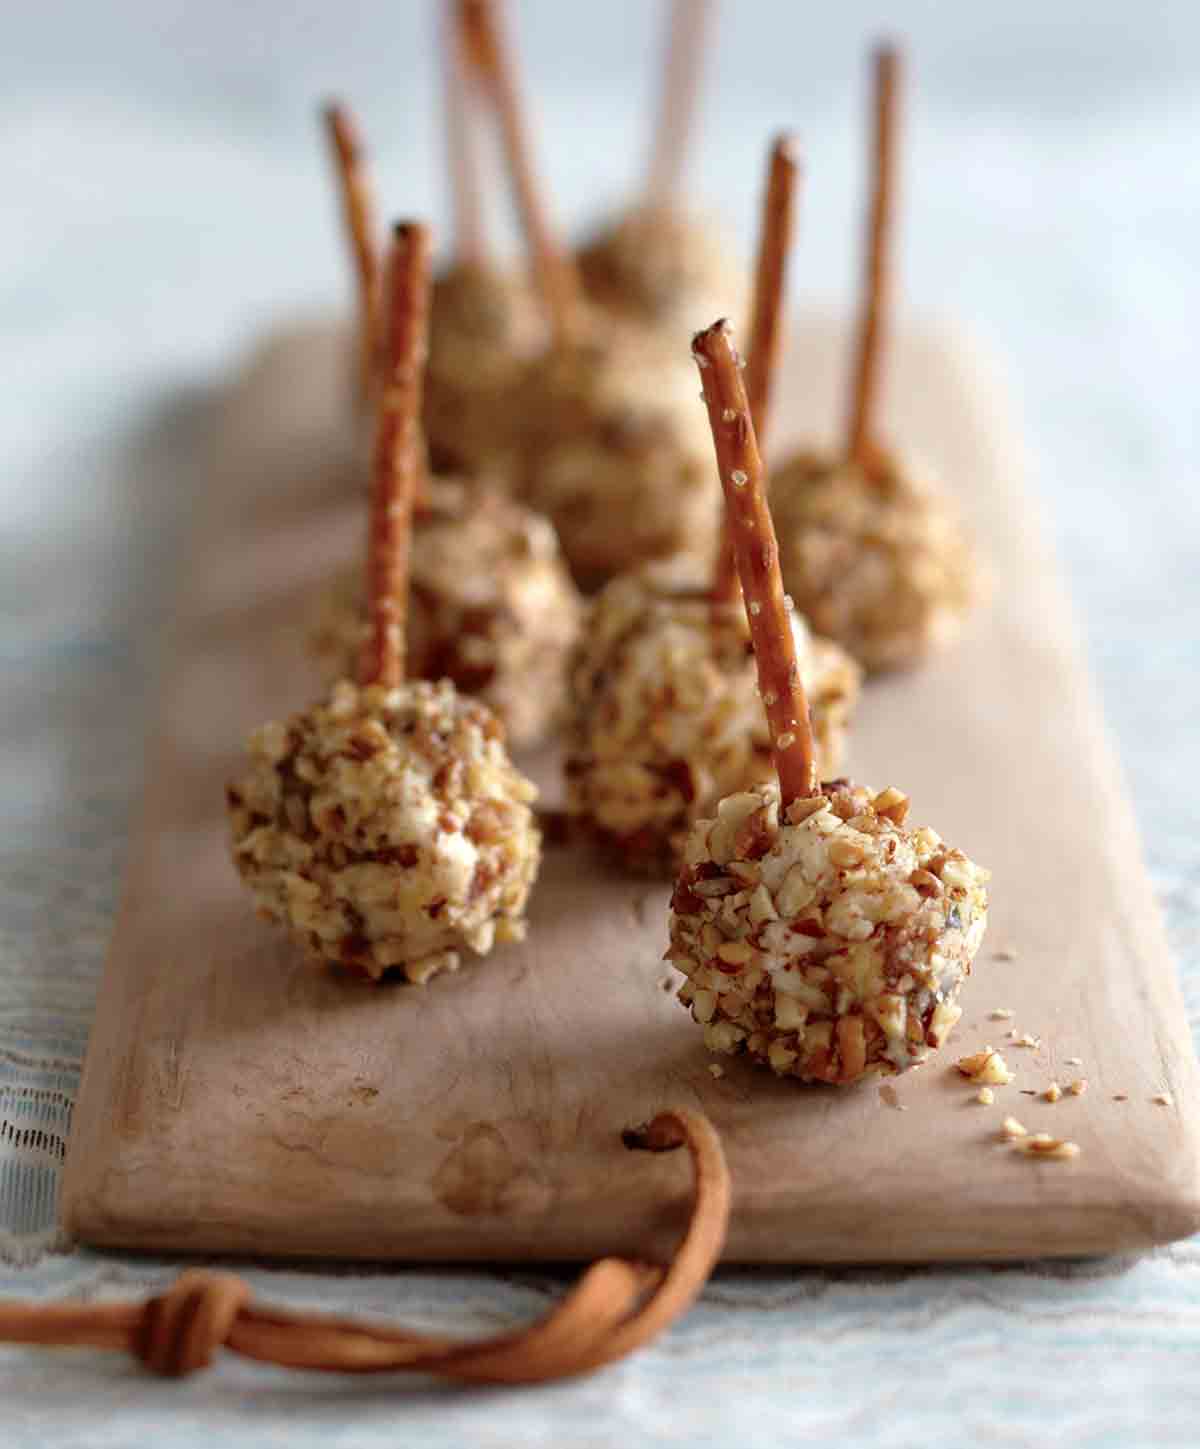 Golf-ball size cheese balls with pretzel stems sitting on a wooden cheese board.